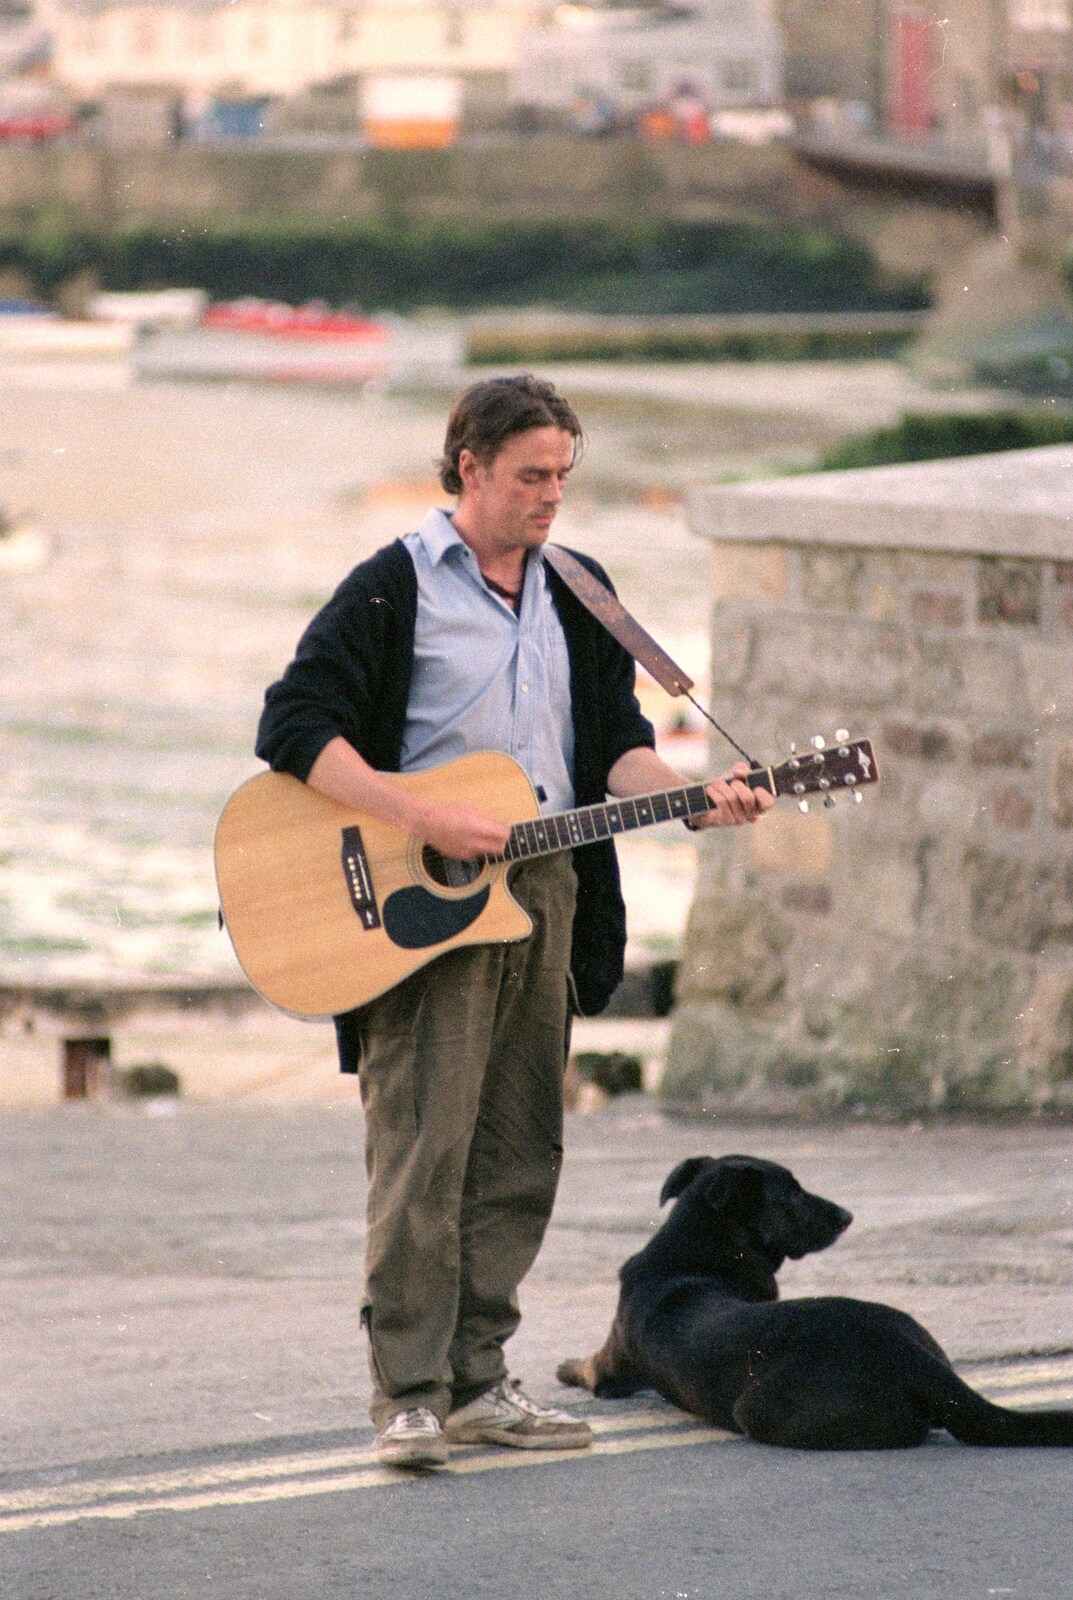 A busker plays guitar as his dog waits from Uni: An End-of-it-all Trip to Land's End, Cornwall - 13th June 1989